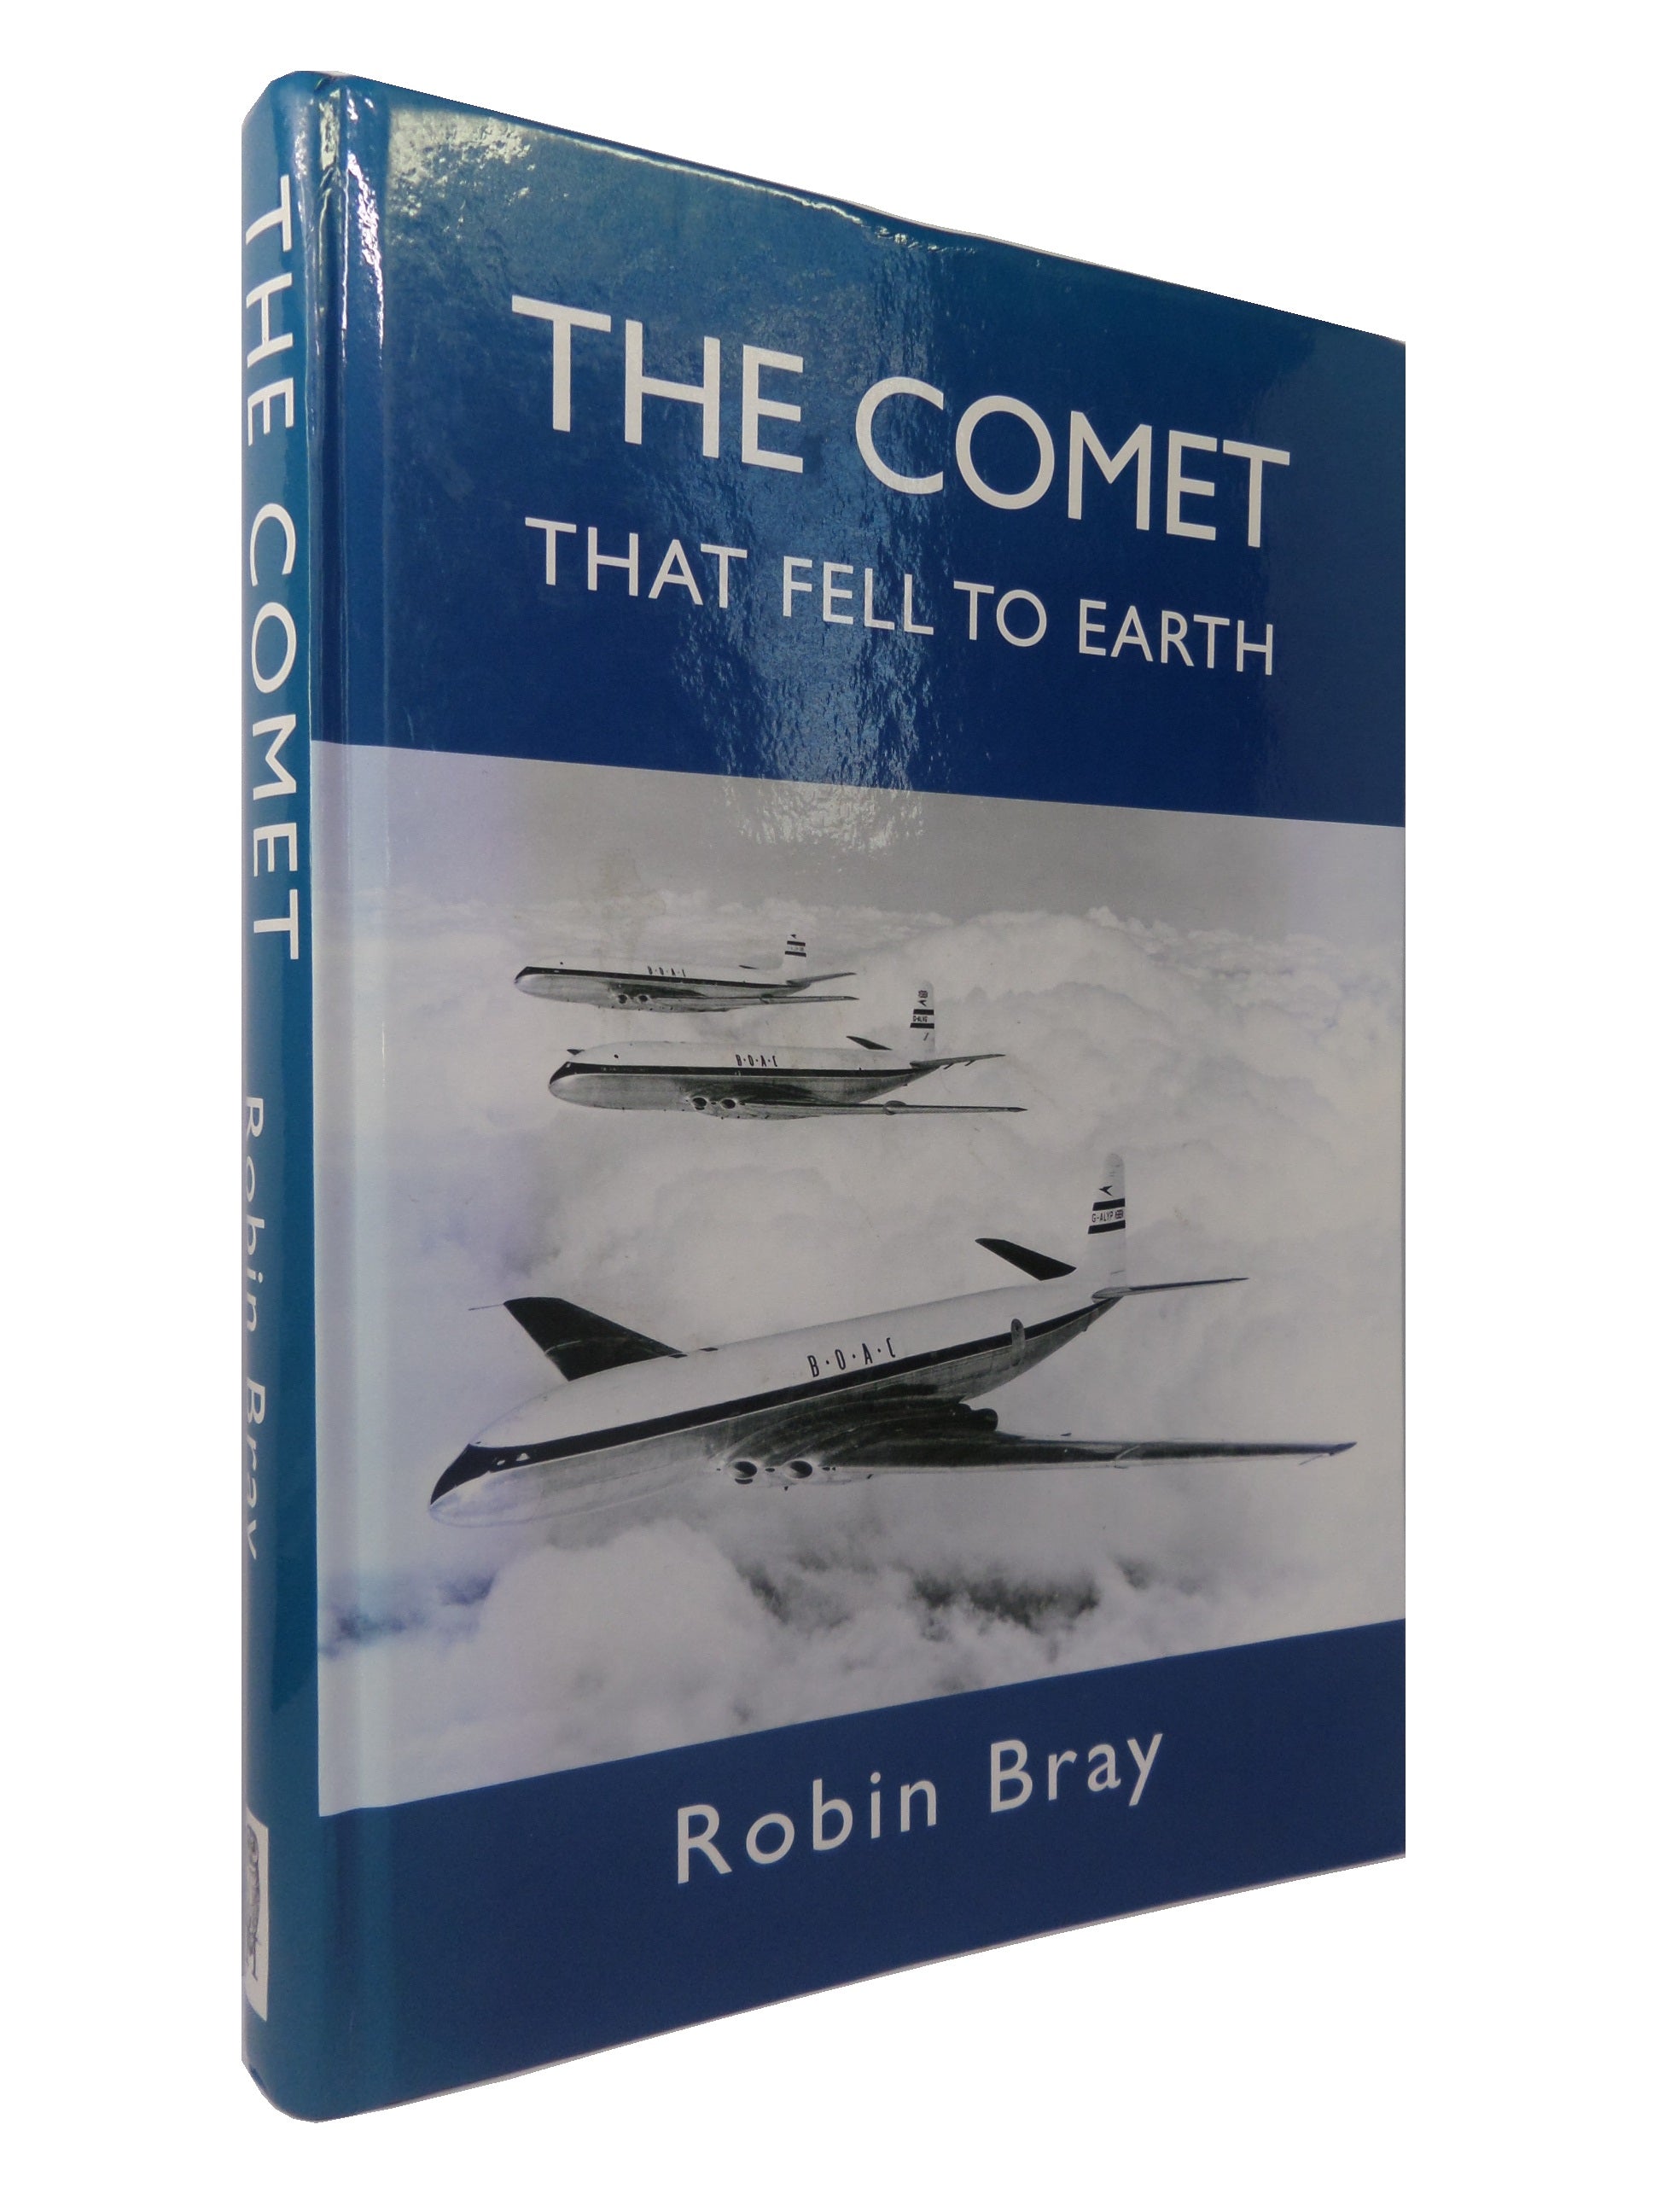 COMET THAT FELL TO EARTH BY ROBIN BRAY 2015 FIRST EDITION HARDCOVER